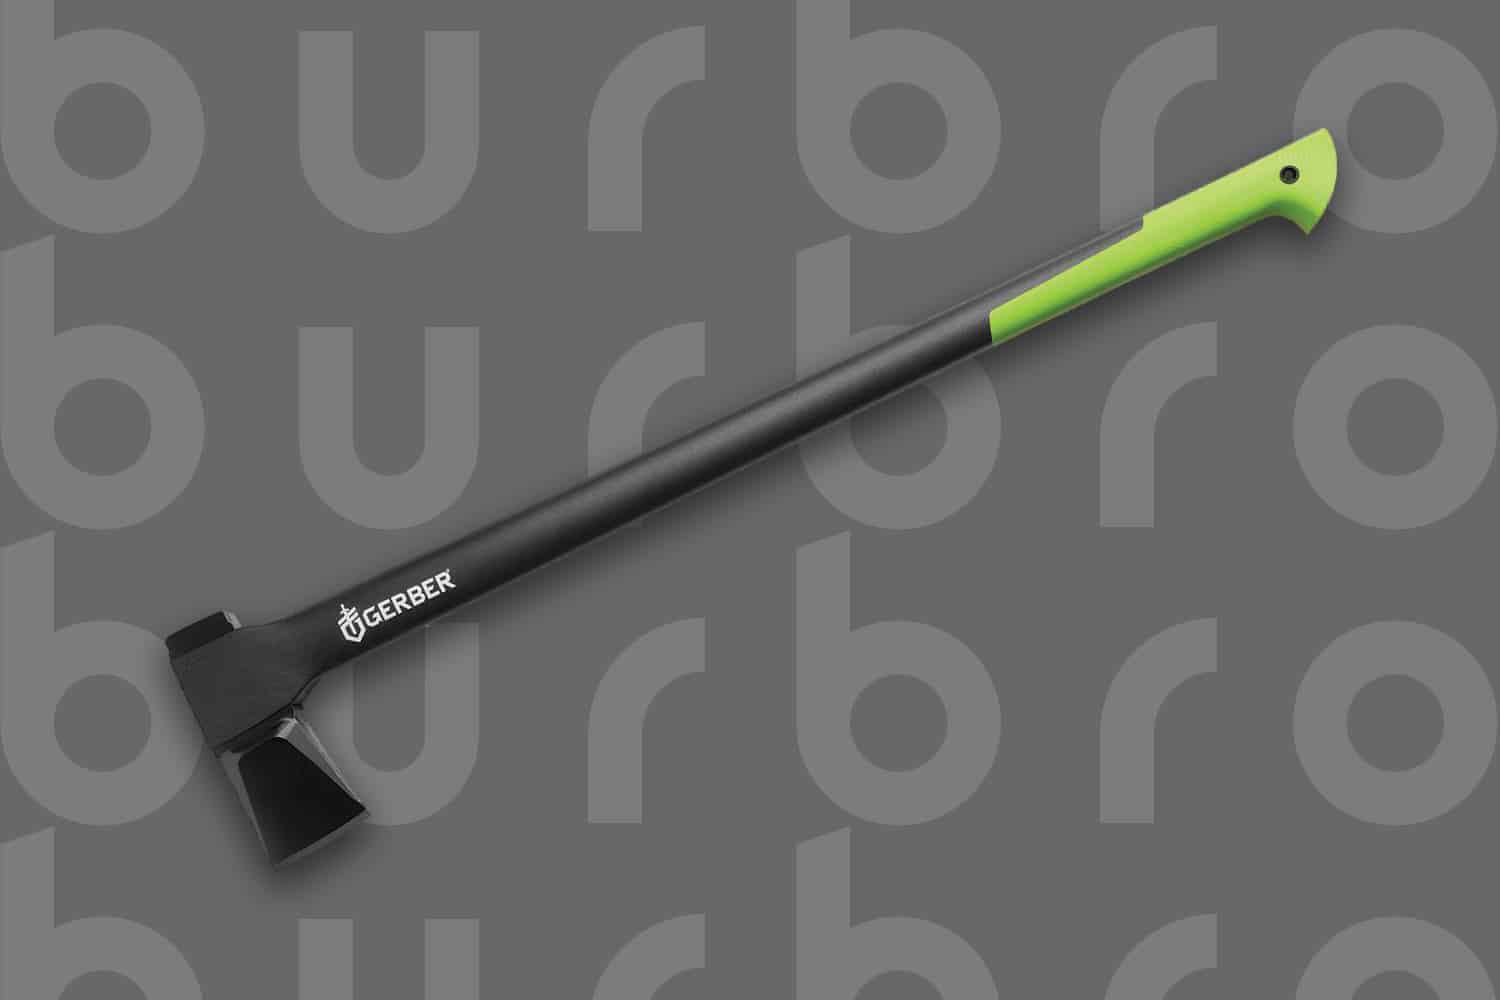 This is the cover photo for our Best Axes article. It features a black and lime green Gerber axe overlaid on a dark grey background with embossed Burbro logo.